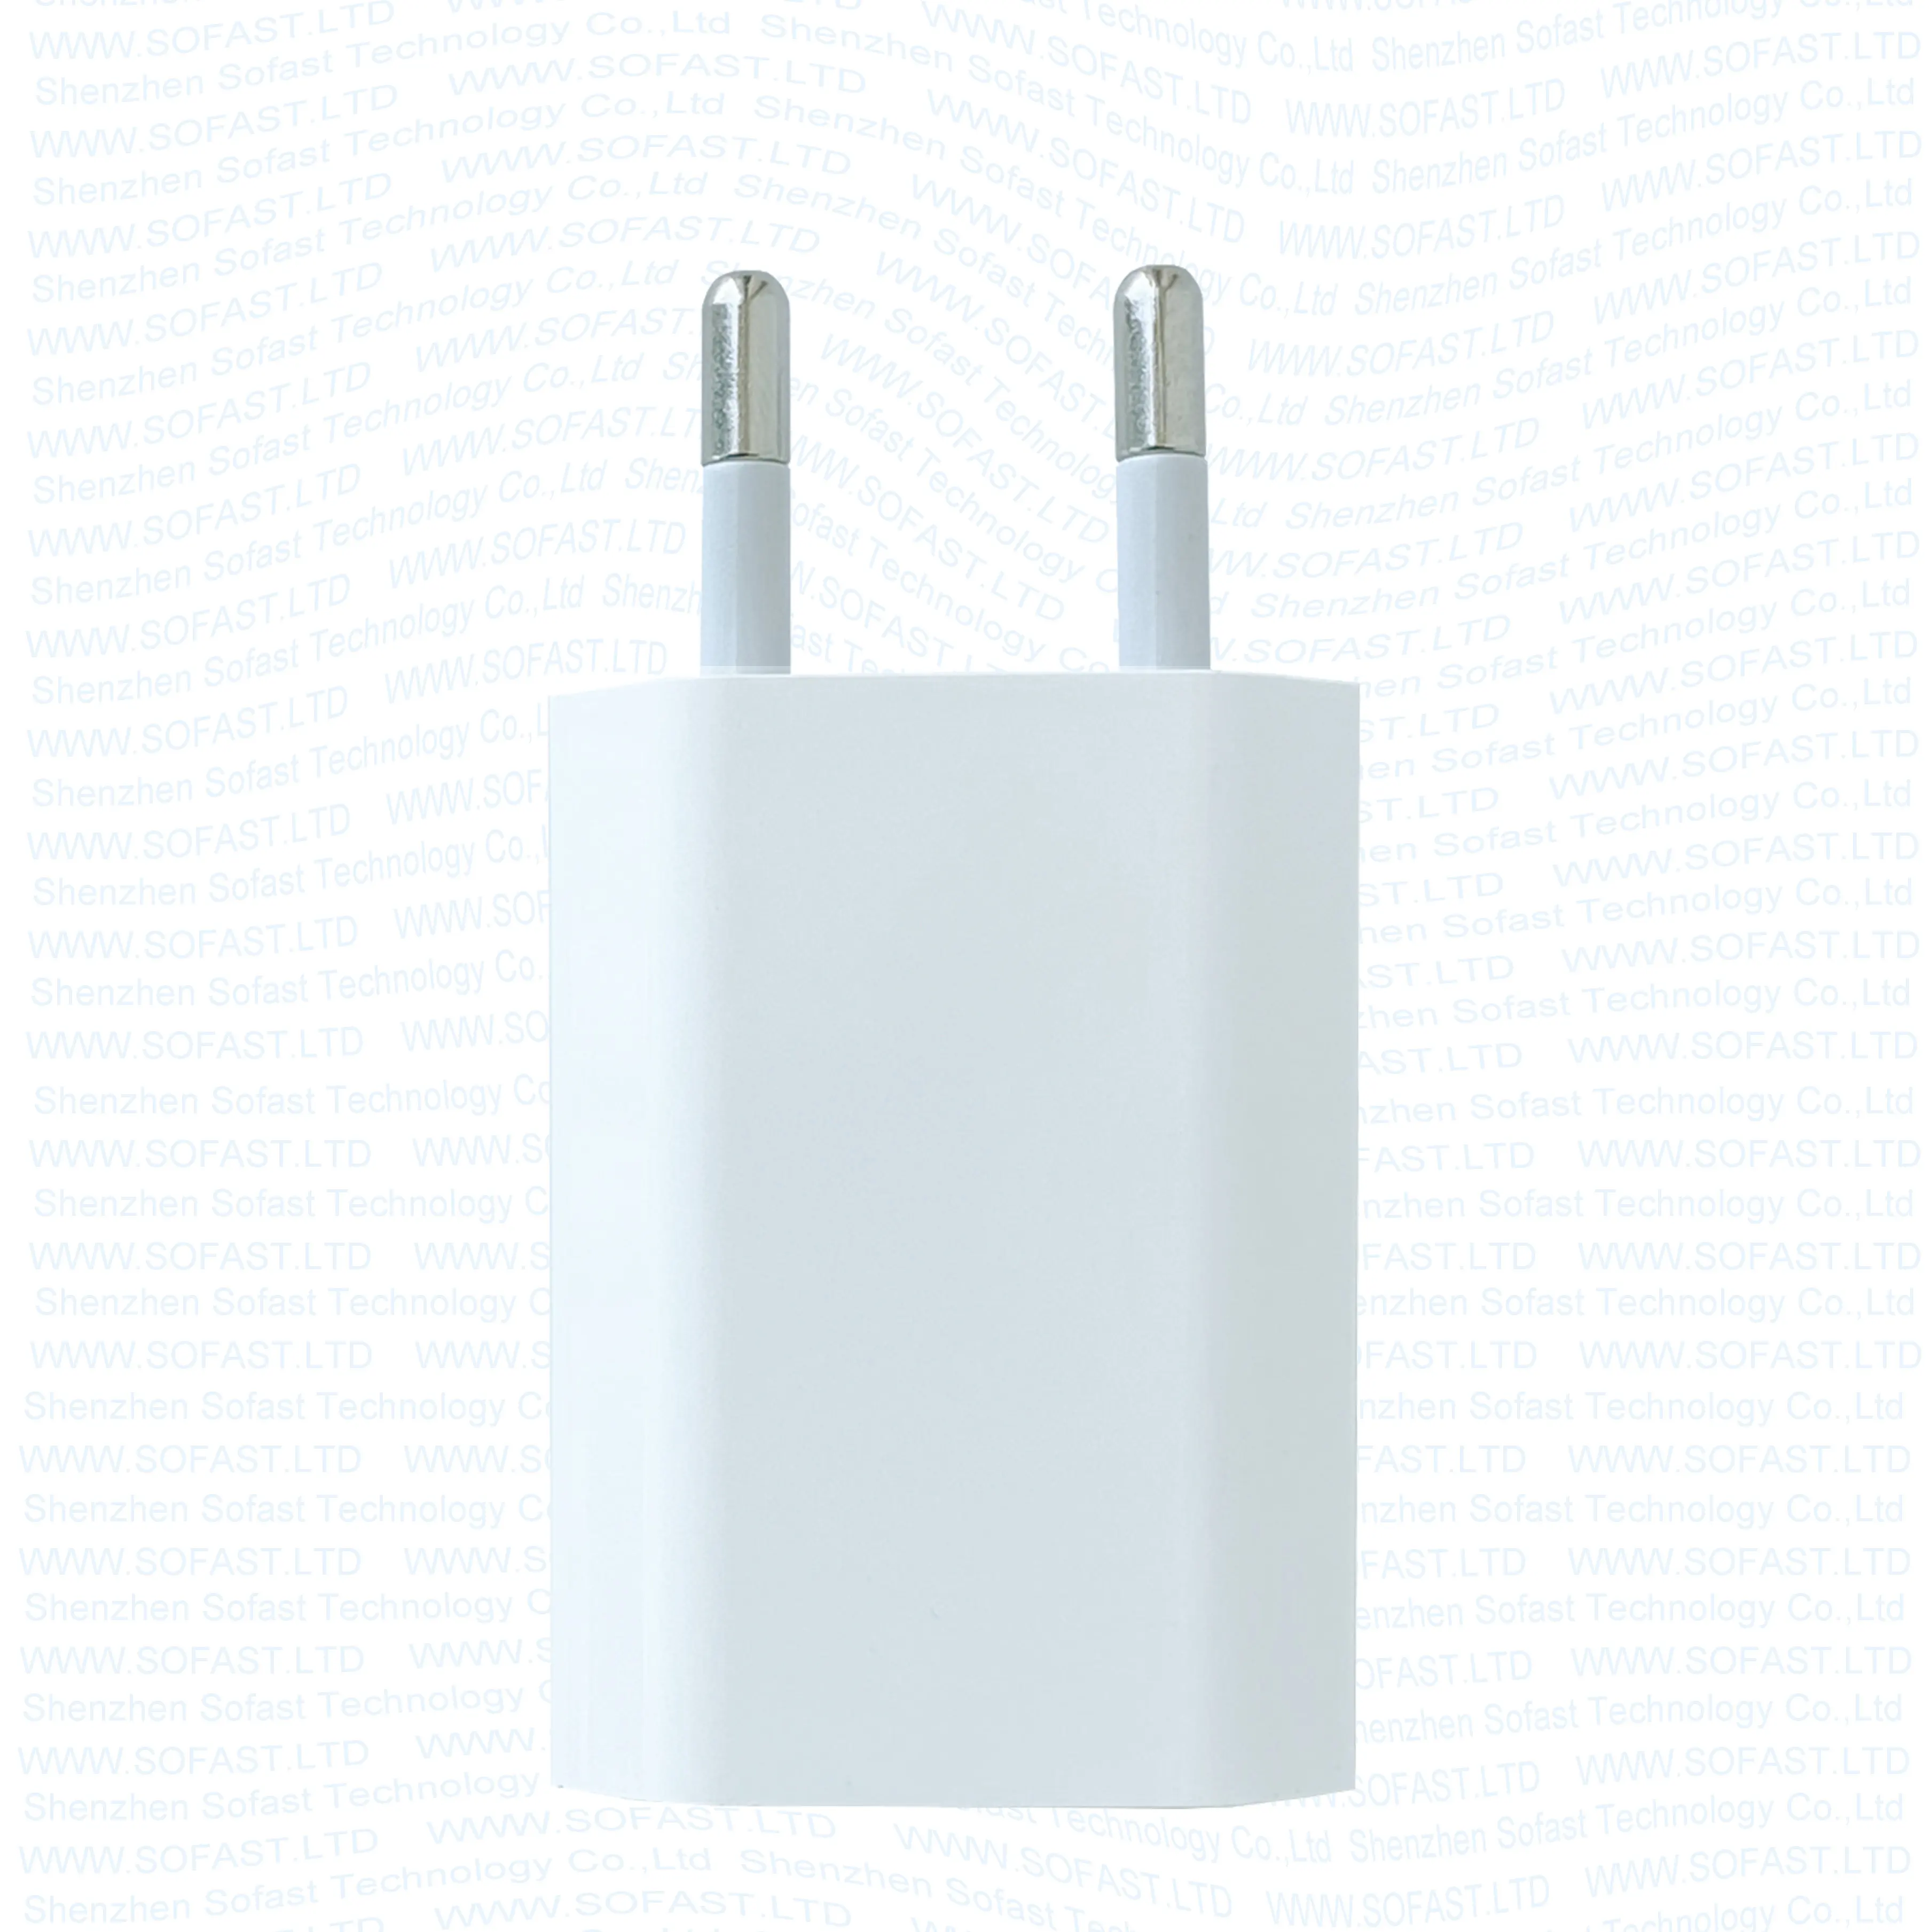 Foxconn for iphone 6 5w usb charger A1400 EU charger cable for iphone 5 charger for iphone